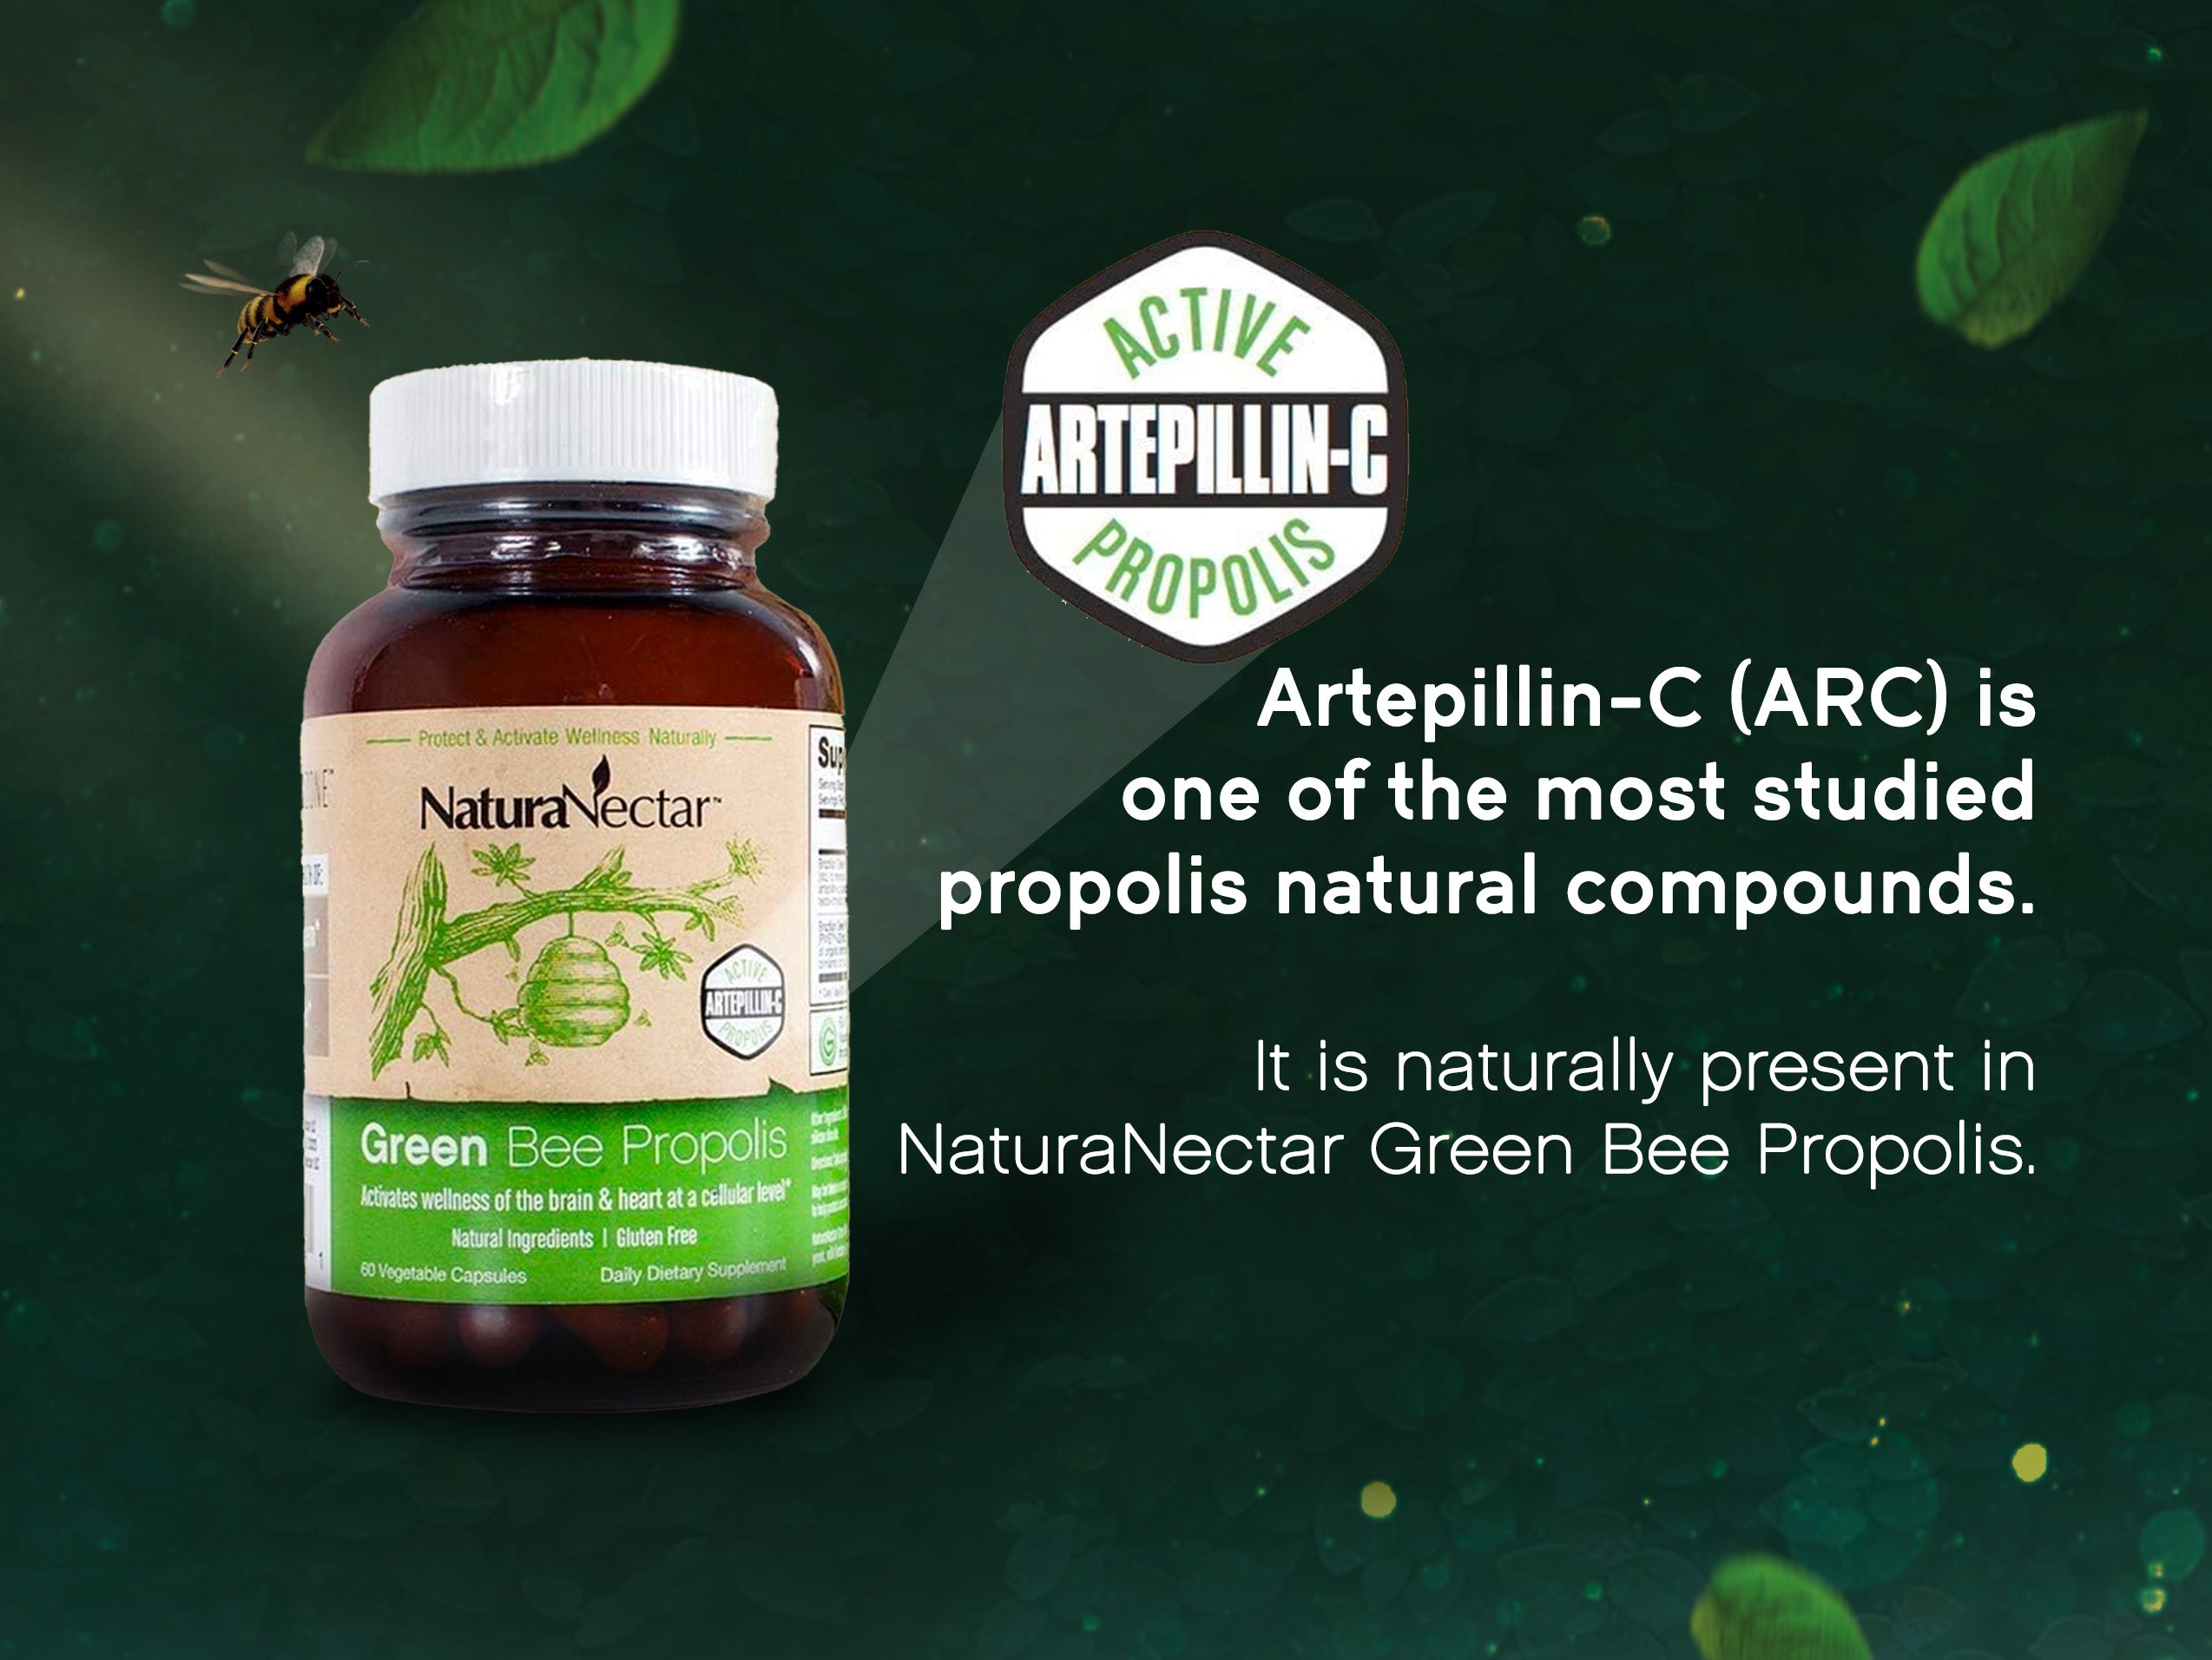 Green Bee Propolis, 60 Veggie Capsule BUNDLE | NSF Contents Certified | with Artepillin-C from Brazilian Ultra-Green Propolis  - Pack of 3